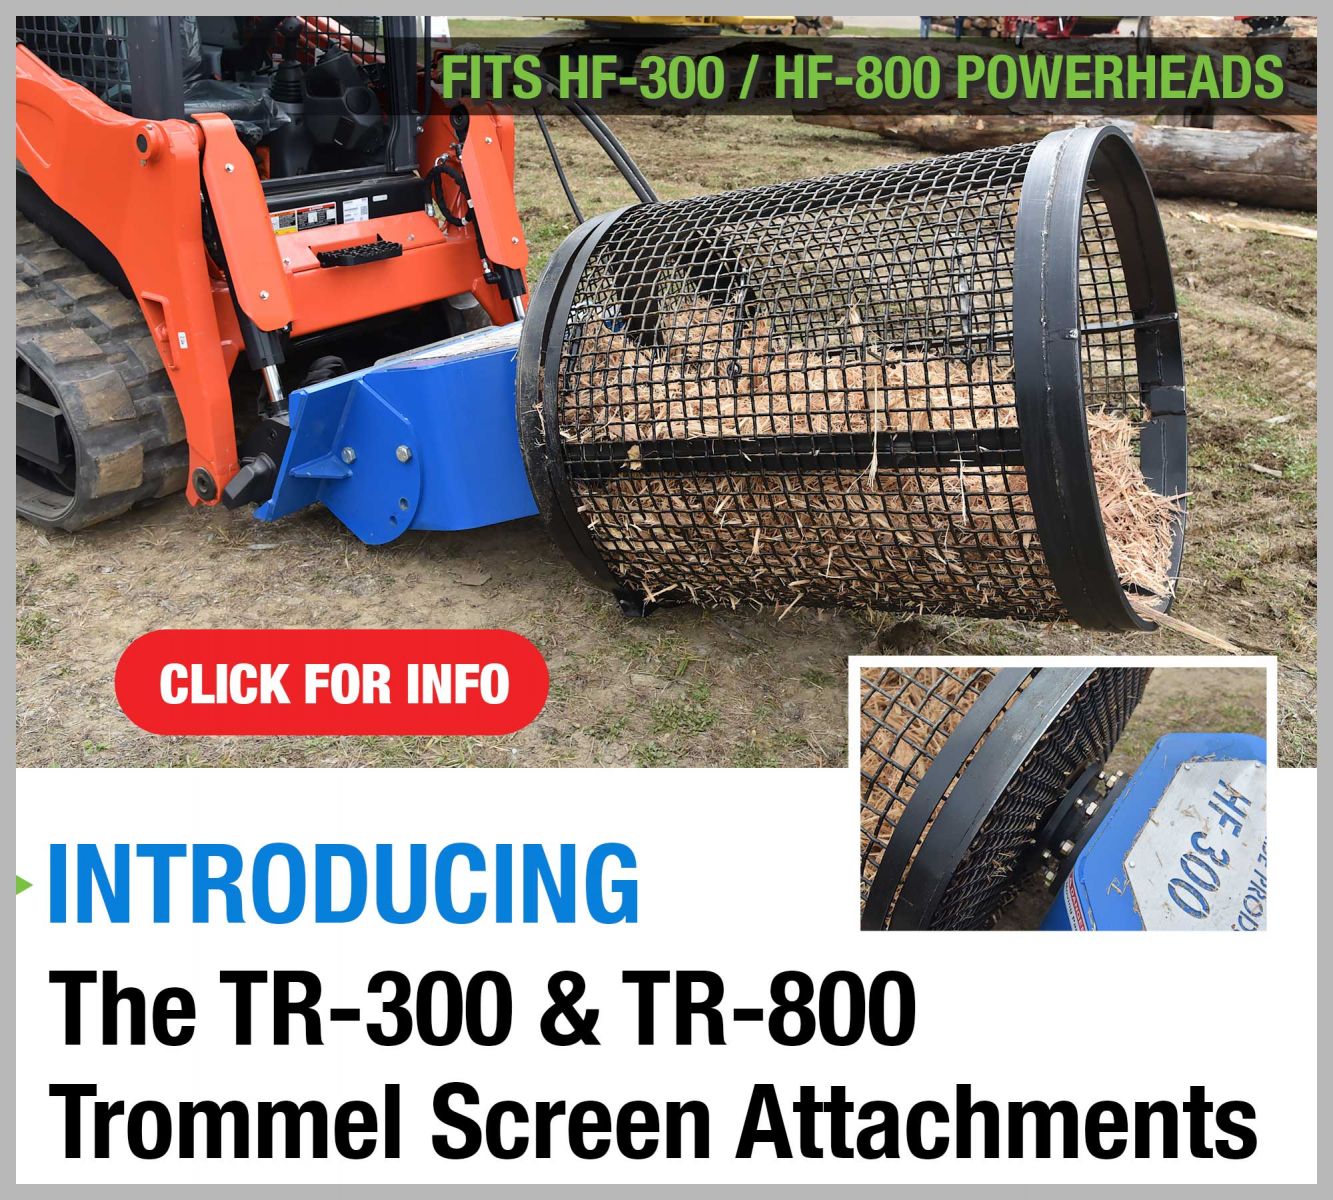 TR-300 & TR-800 Trommel Screen Attachments From U.S. Pride Products